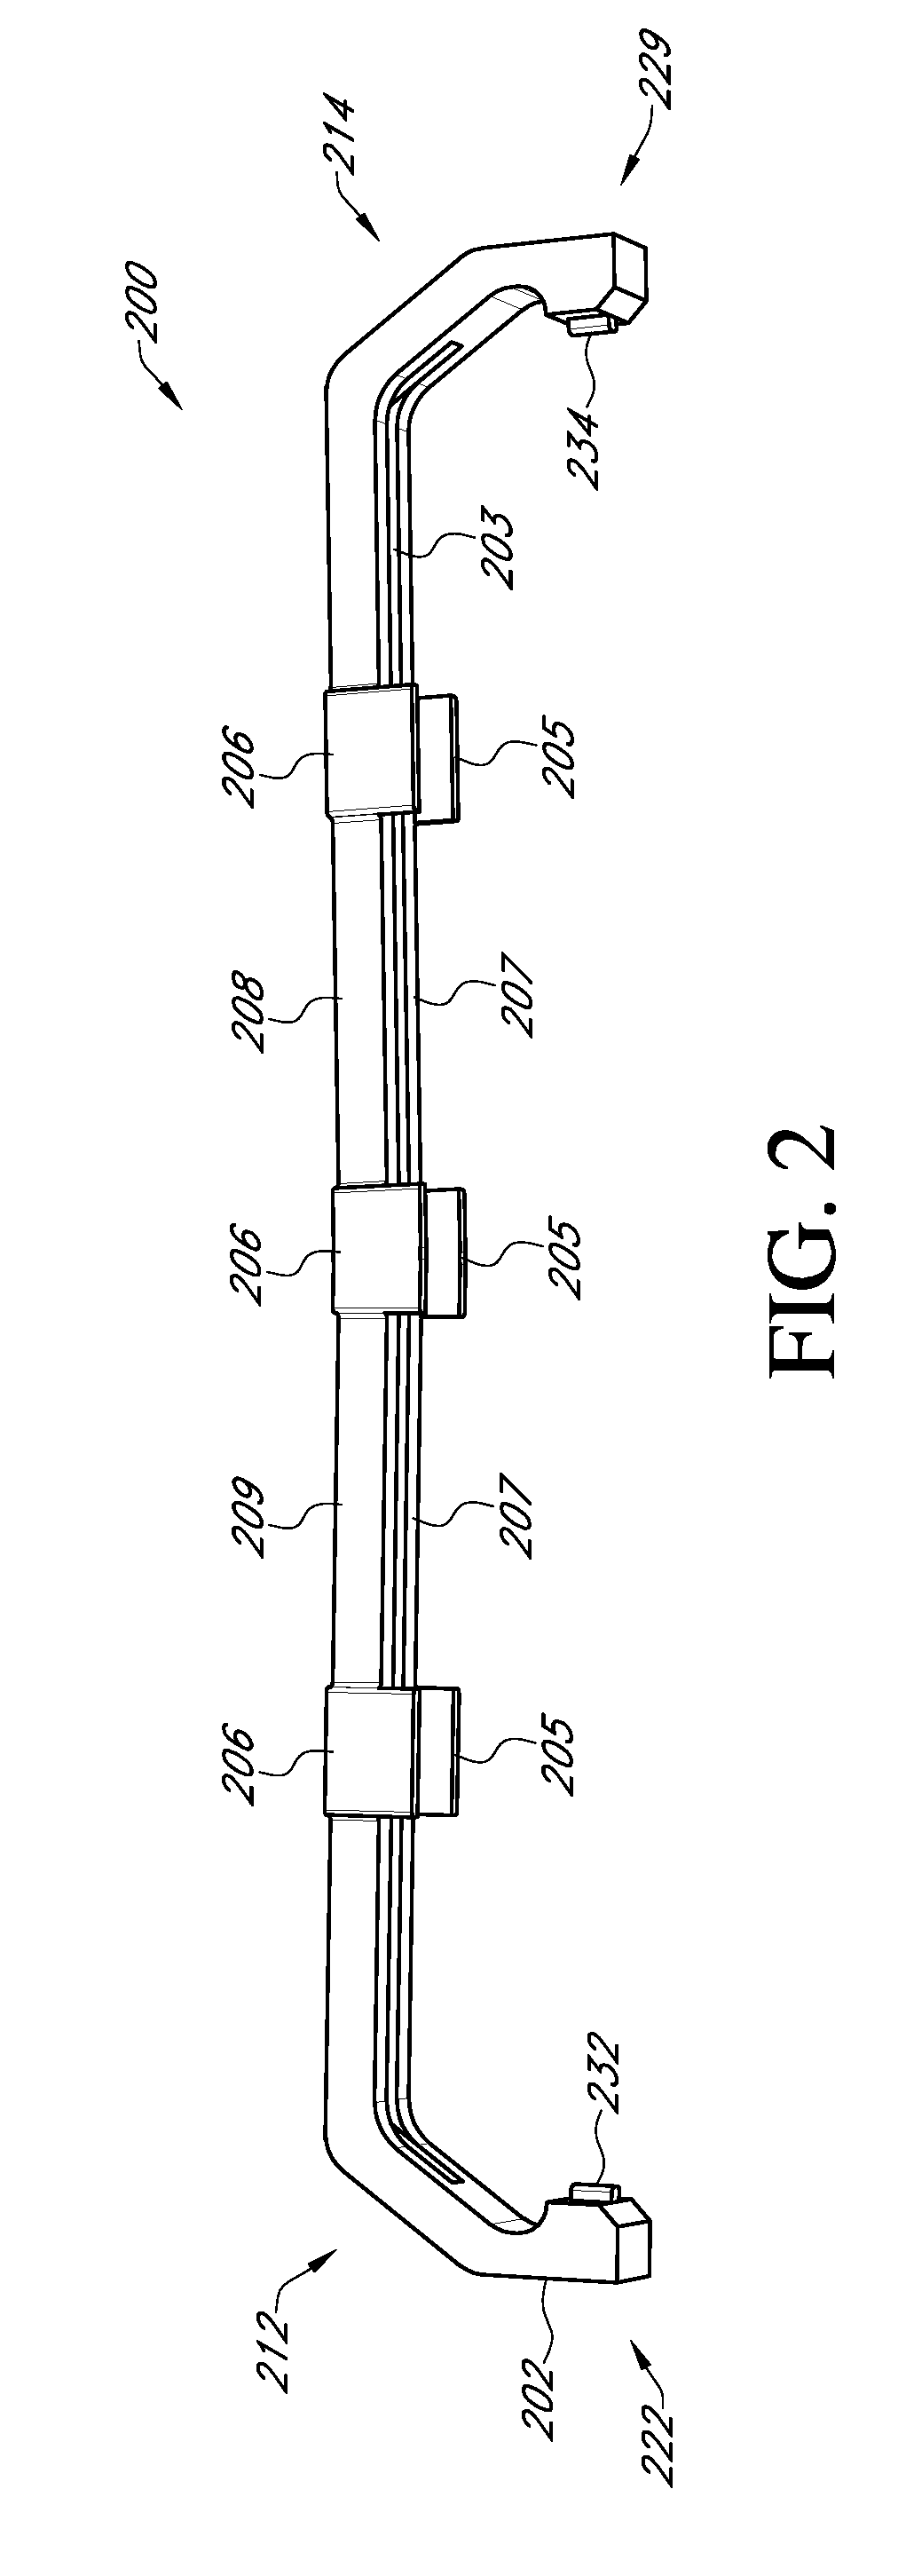 System and method for retaining memory modules